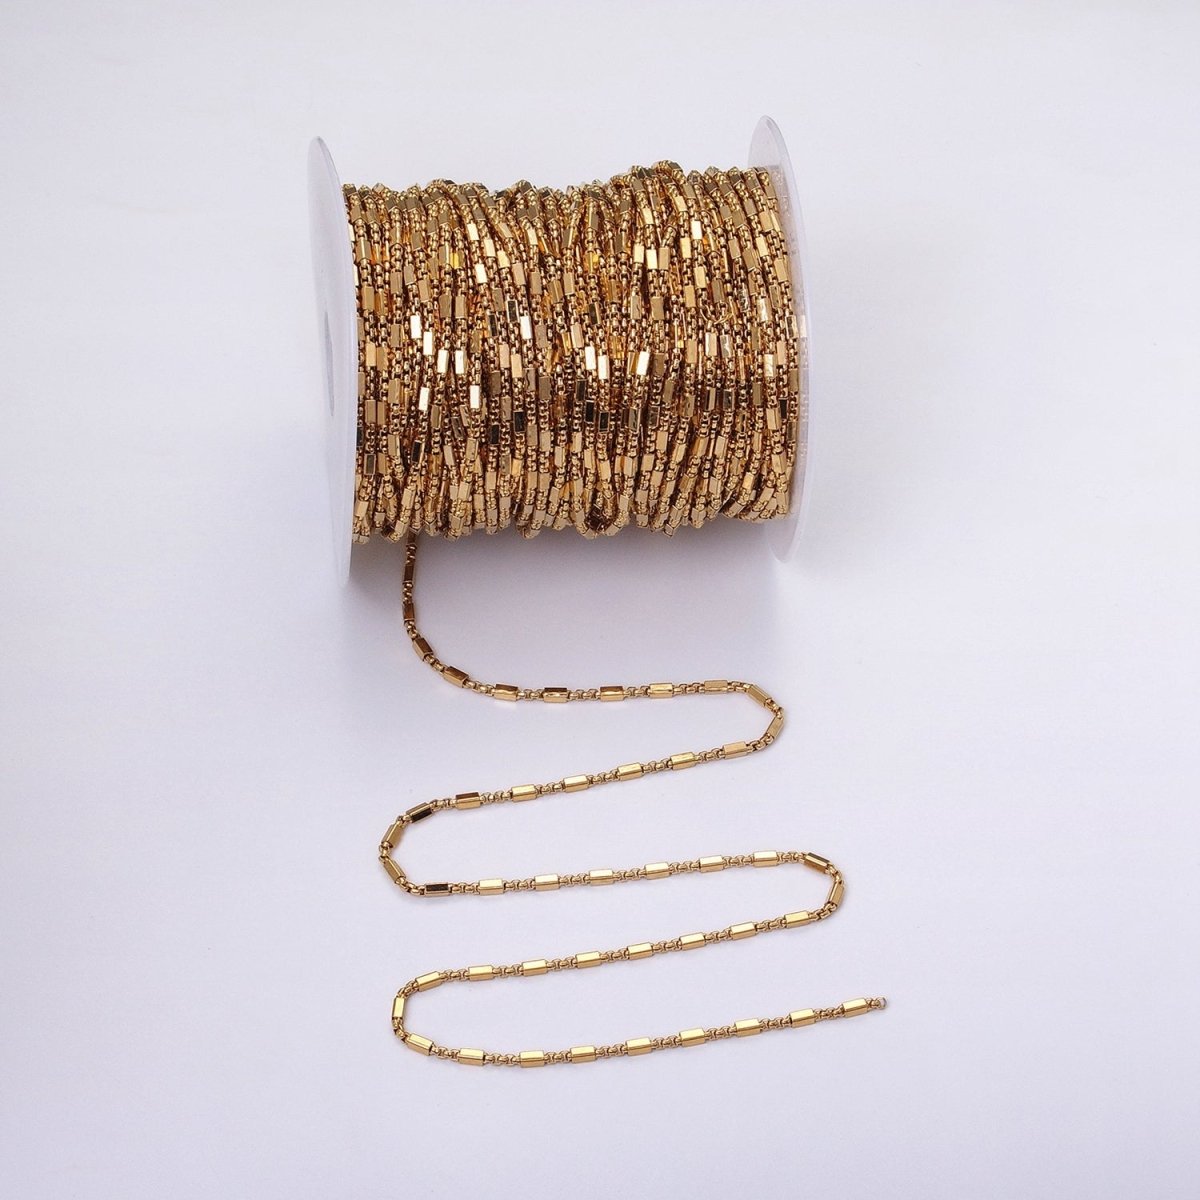 24k Gold Filled Beaded Cable with Rolo Link 2.1mm Square Bead Chain Link Unfinished Yard Chain in Gold & Silver | ROLL-1321 Clearance Pricing - DLUXCA